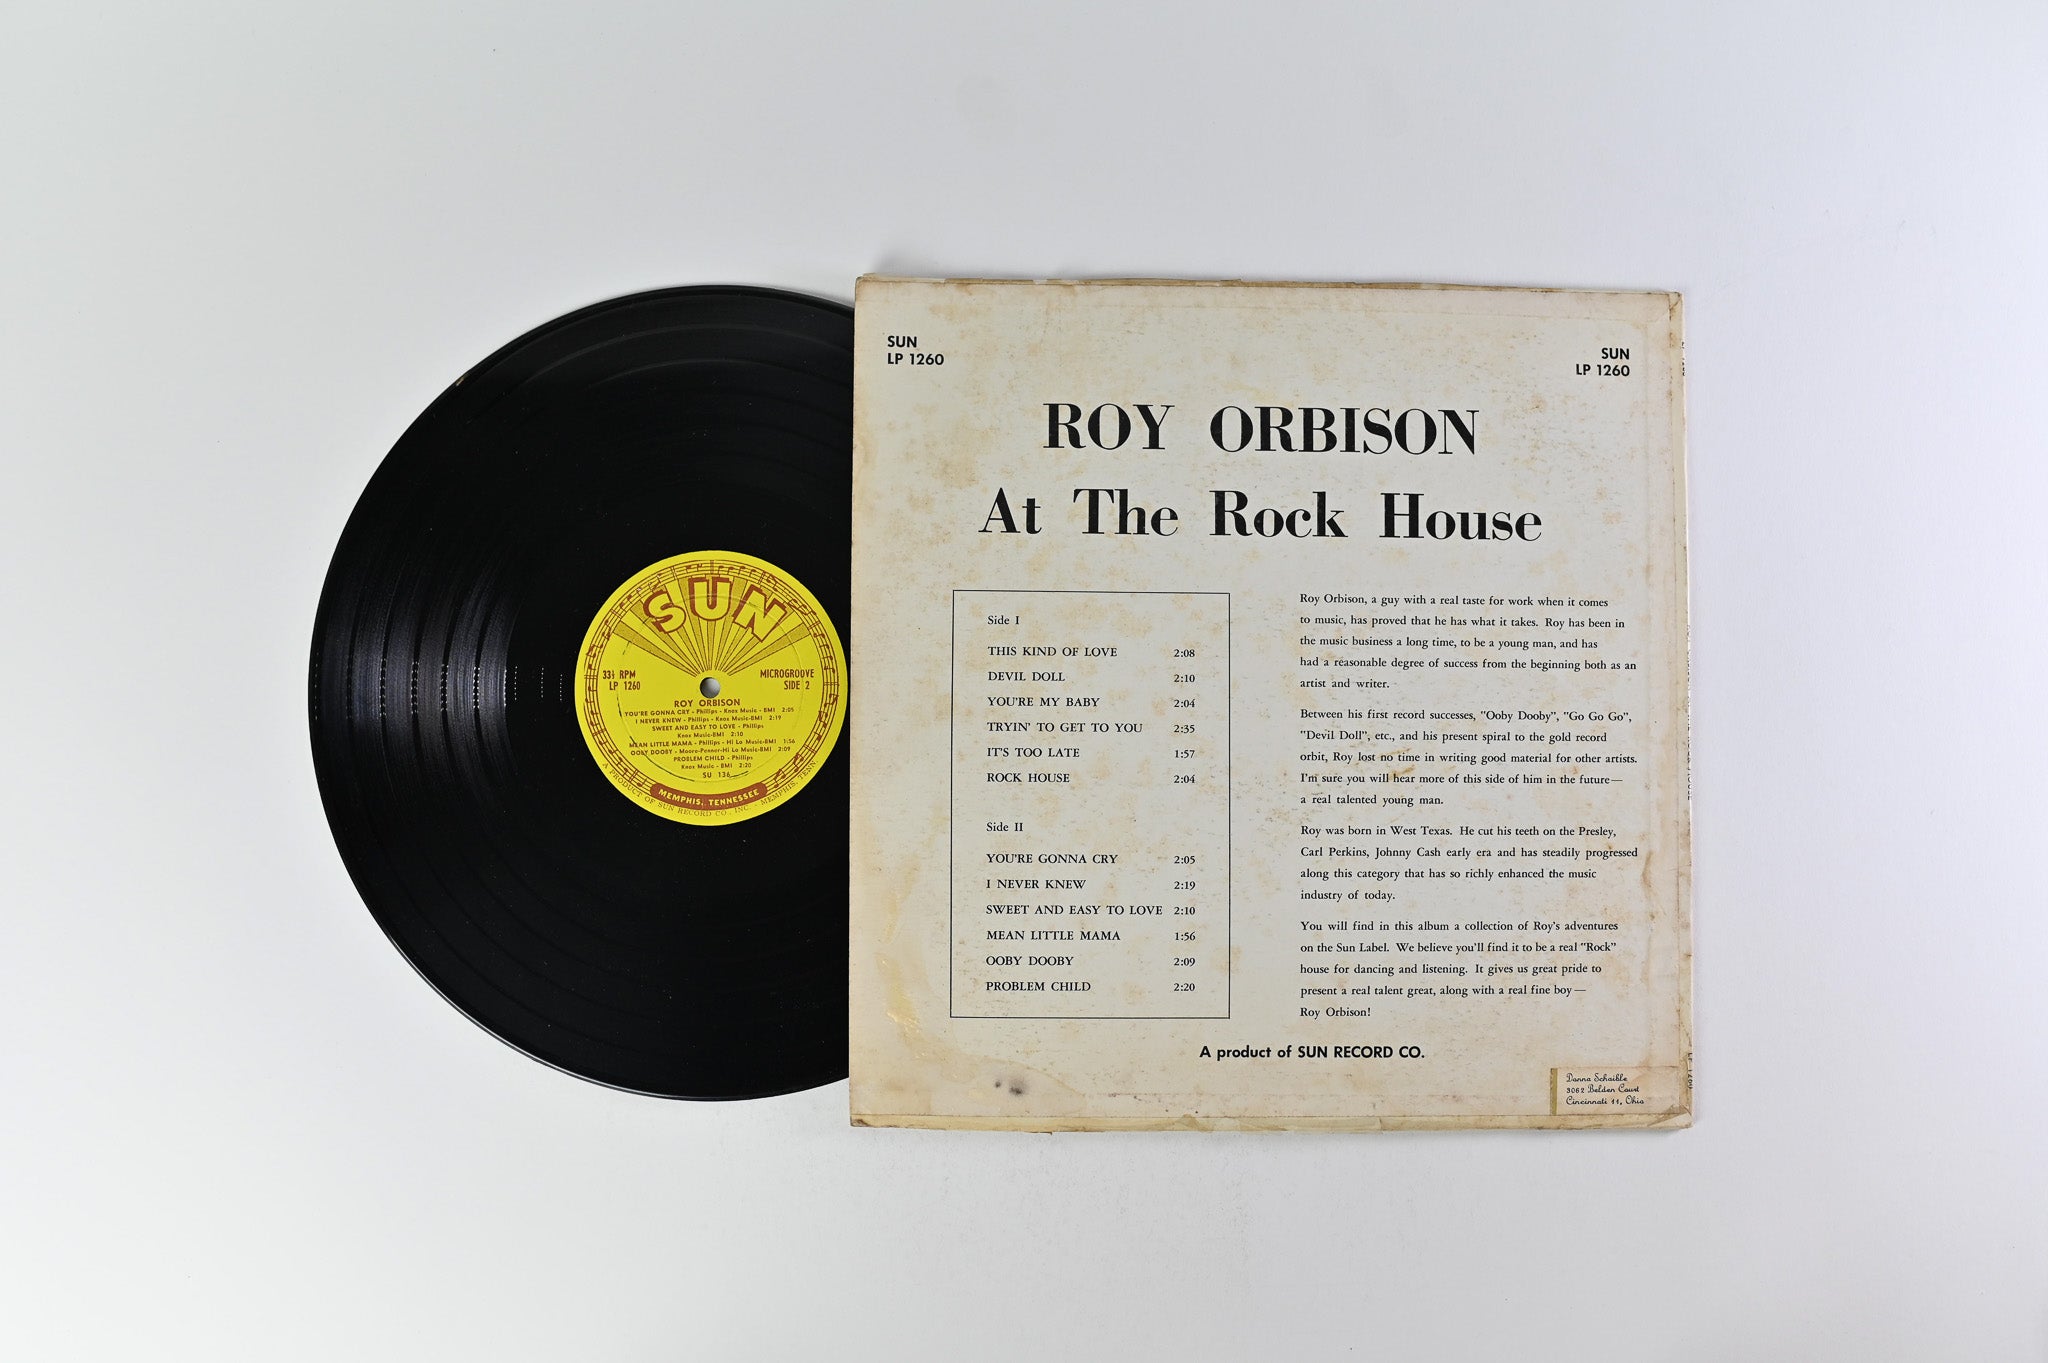 Roy Orbison - At The Rock House on Sun